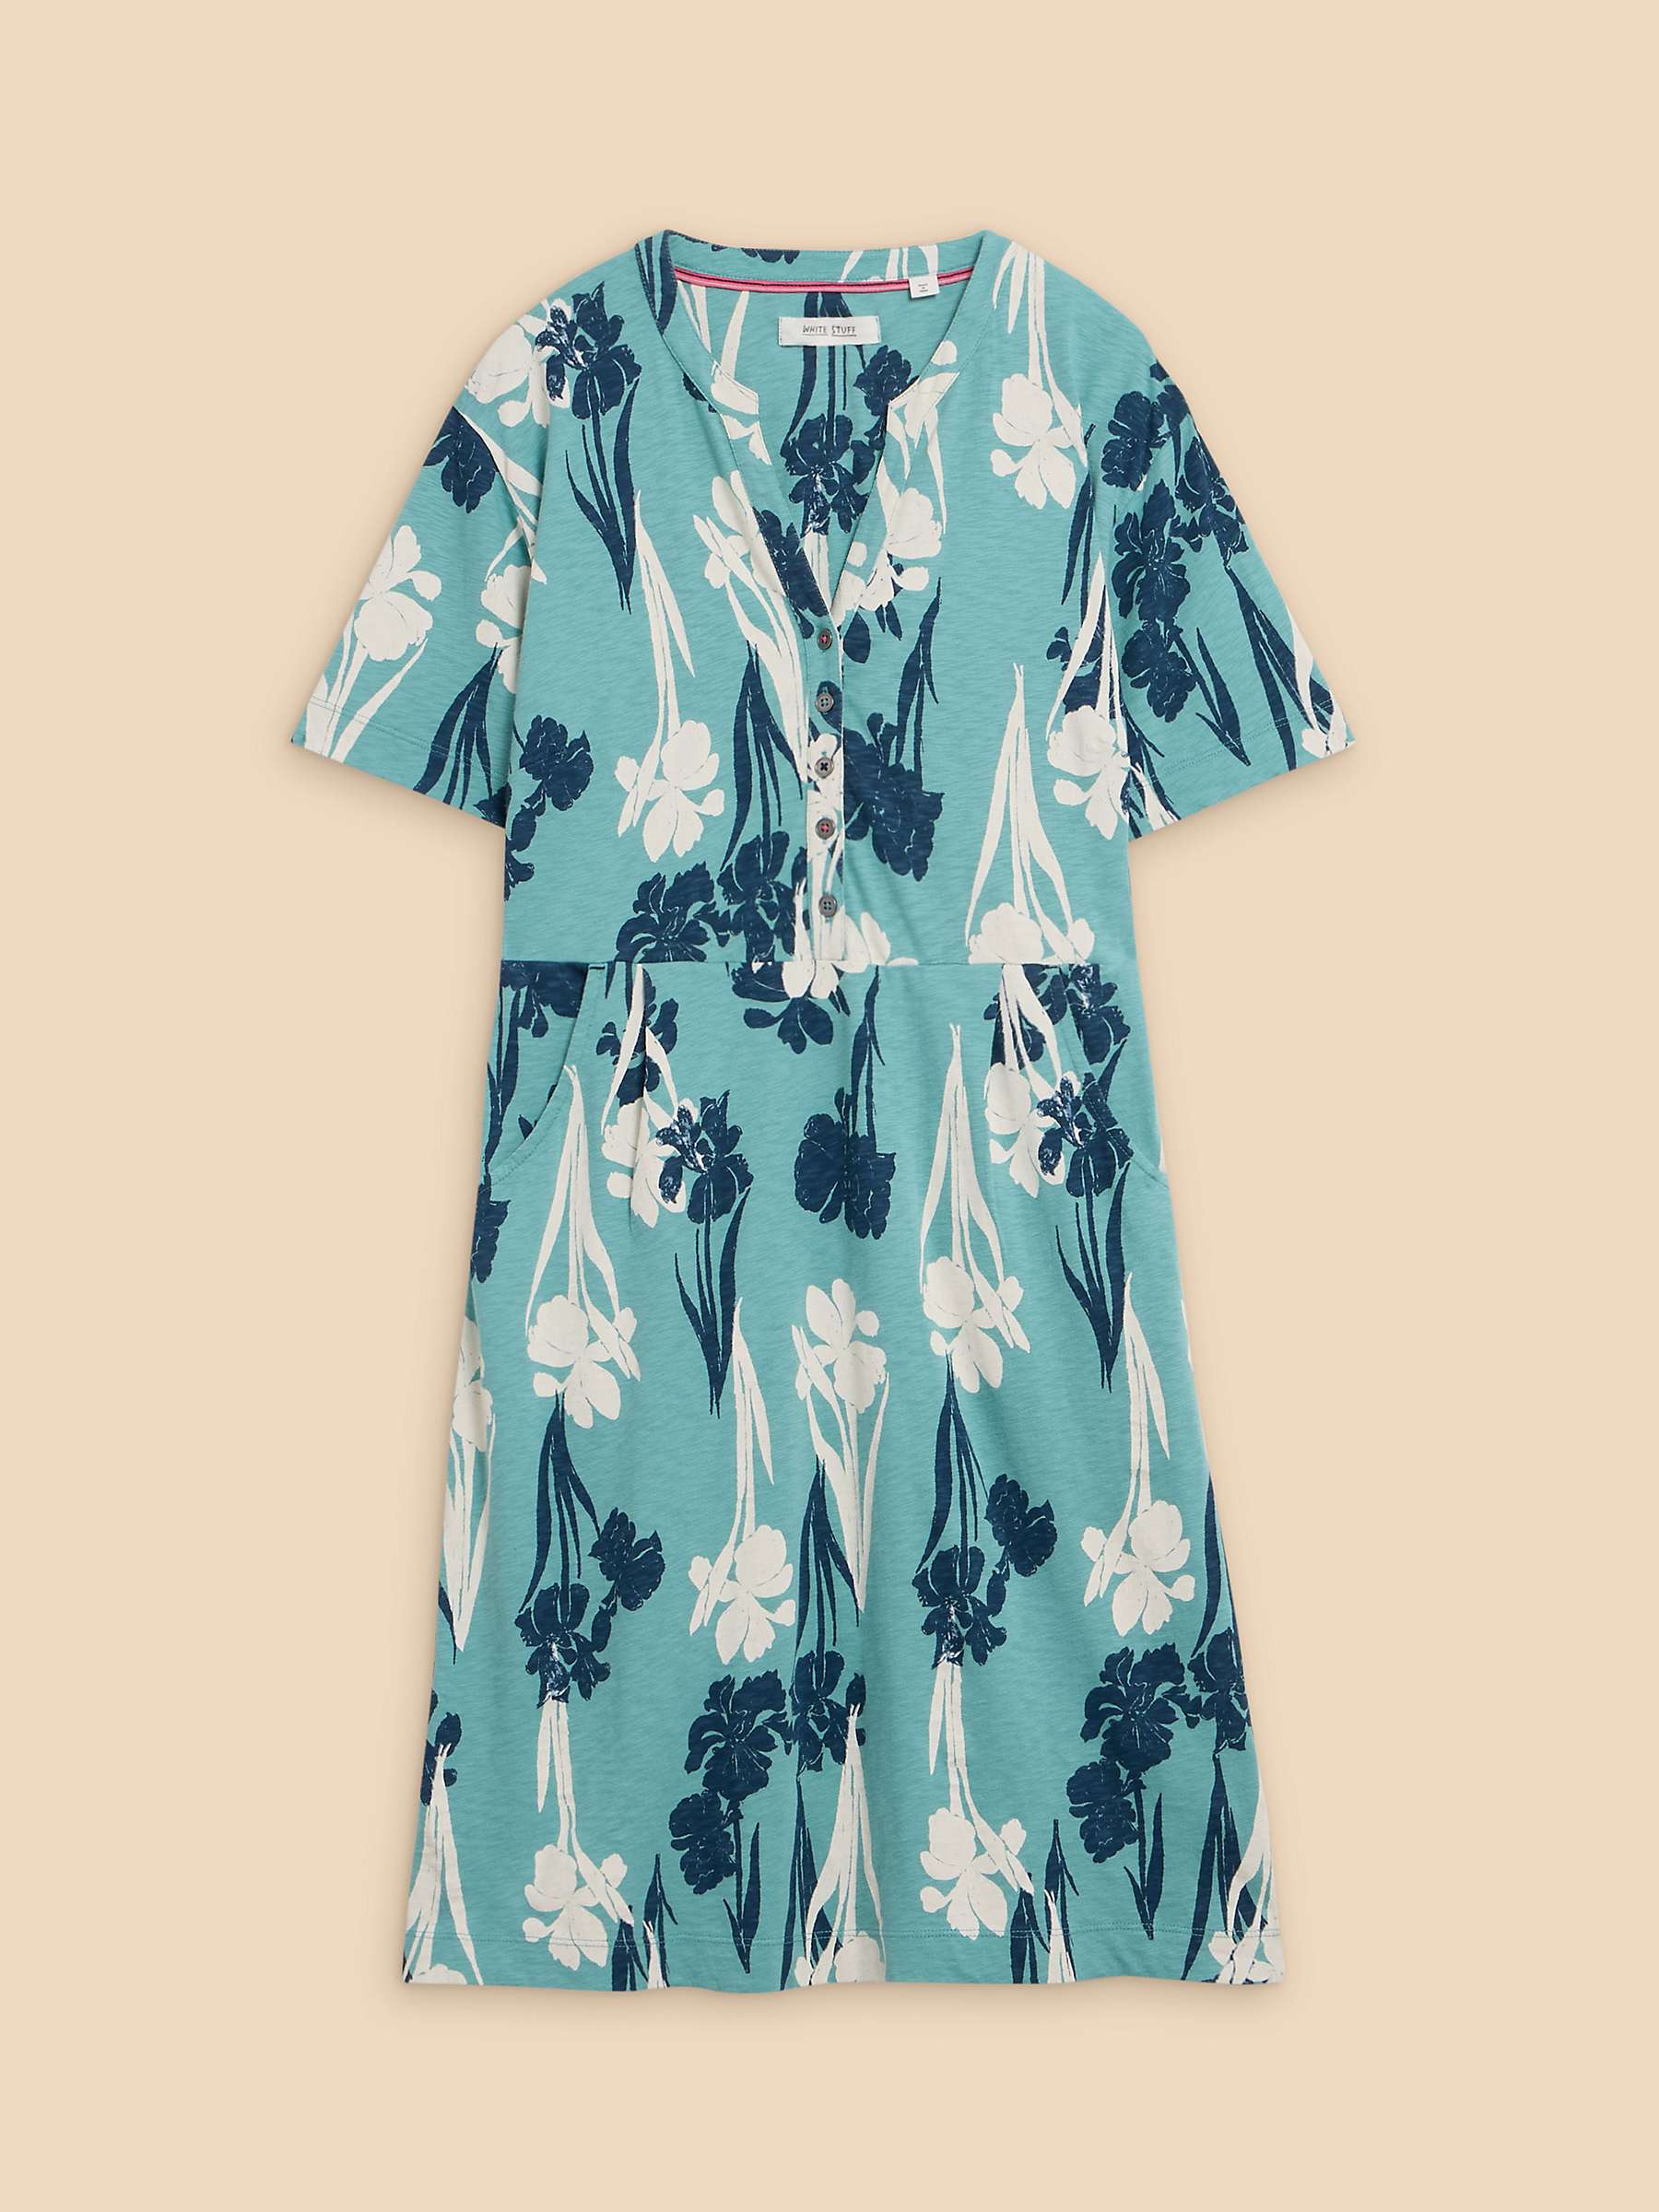 Buy White Stuff Tammy Cotton Jersey Dress, Teal Online at johnlewis.com